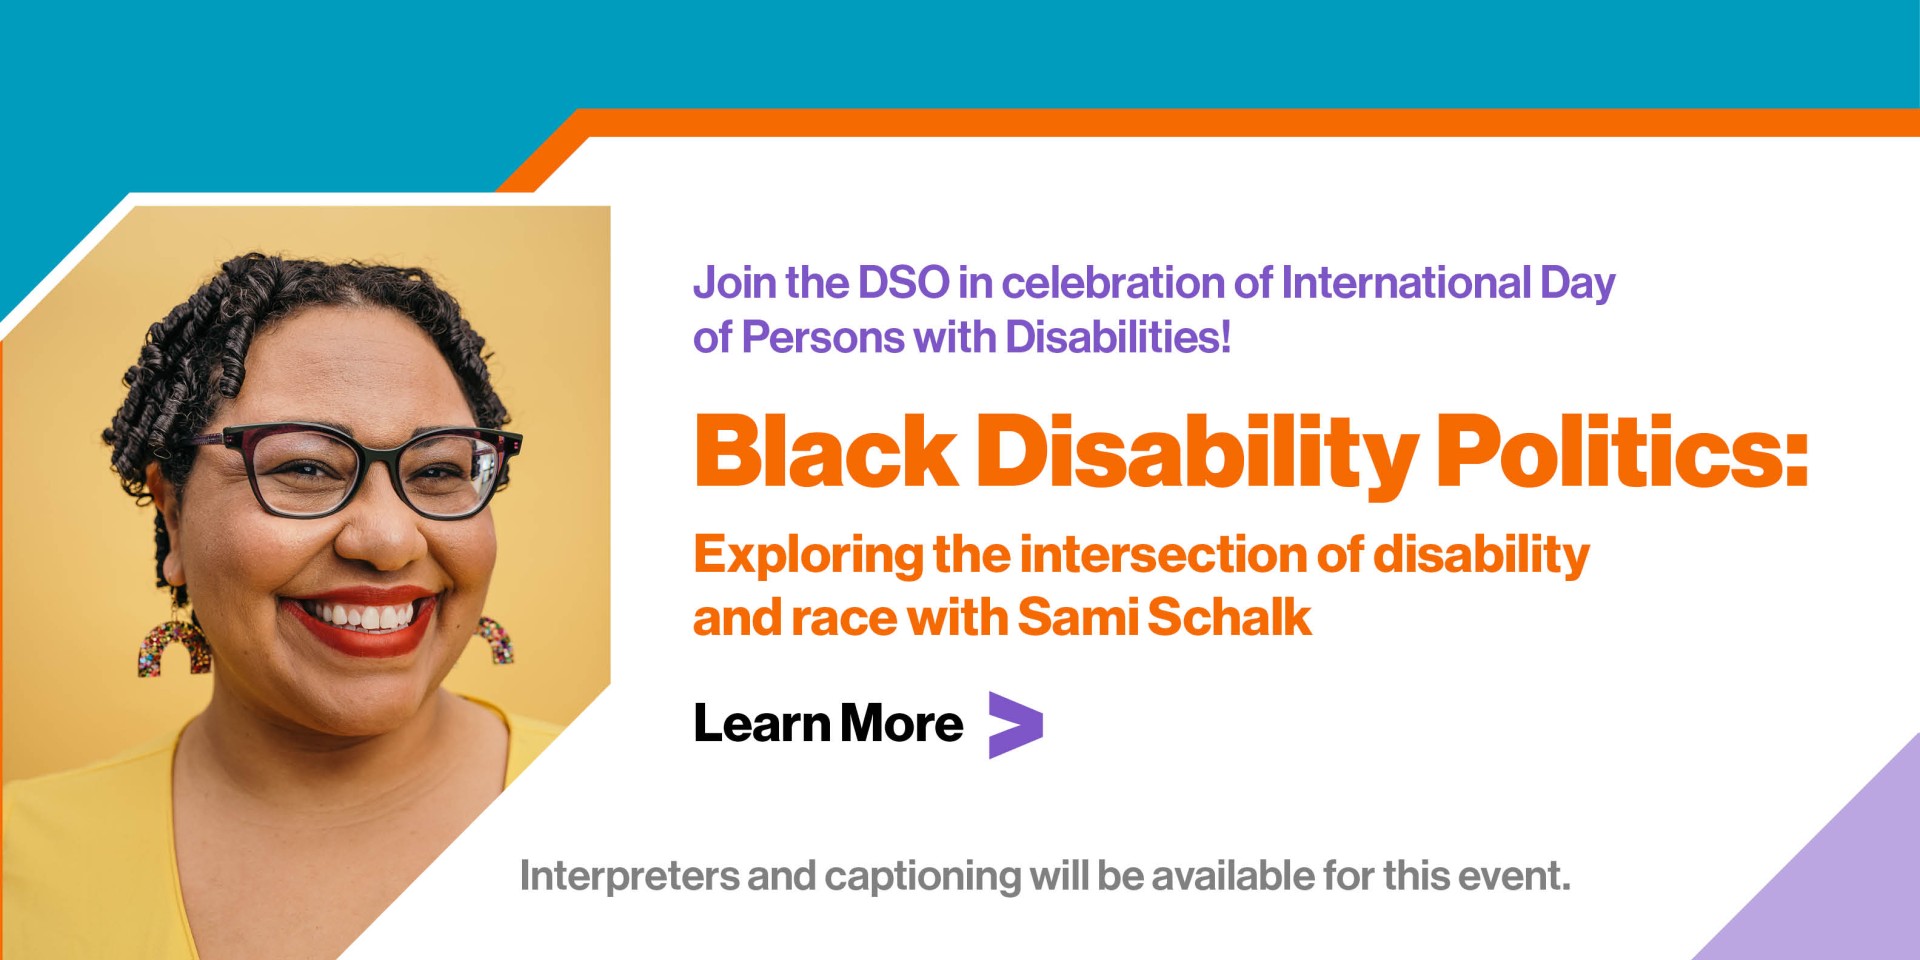 Join the DSO in celebration of International Day of Persons with Disabilities! Black Disability Politics: Exploring the intersection of disability and race with Sami Schalk Learn more Interpreters and captioning will be available for this event